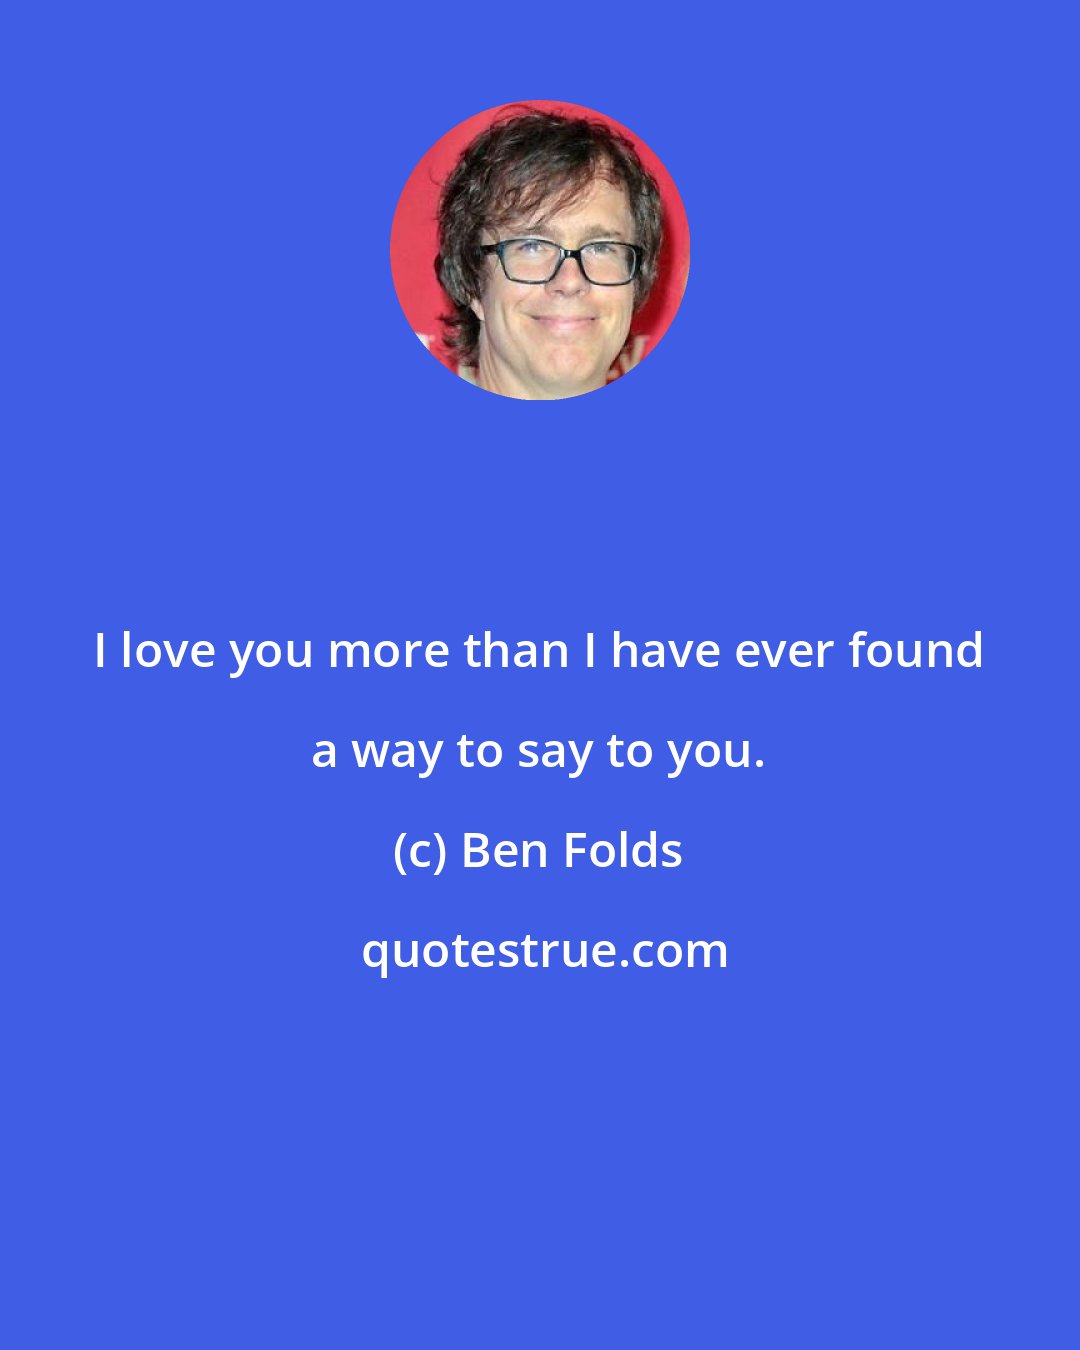 Ben Folds: I love you more than I have ever found a way to say to you.